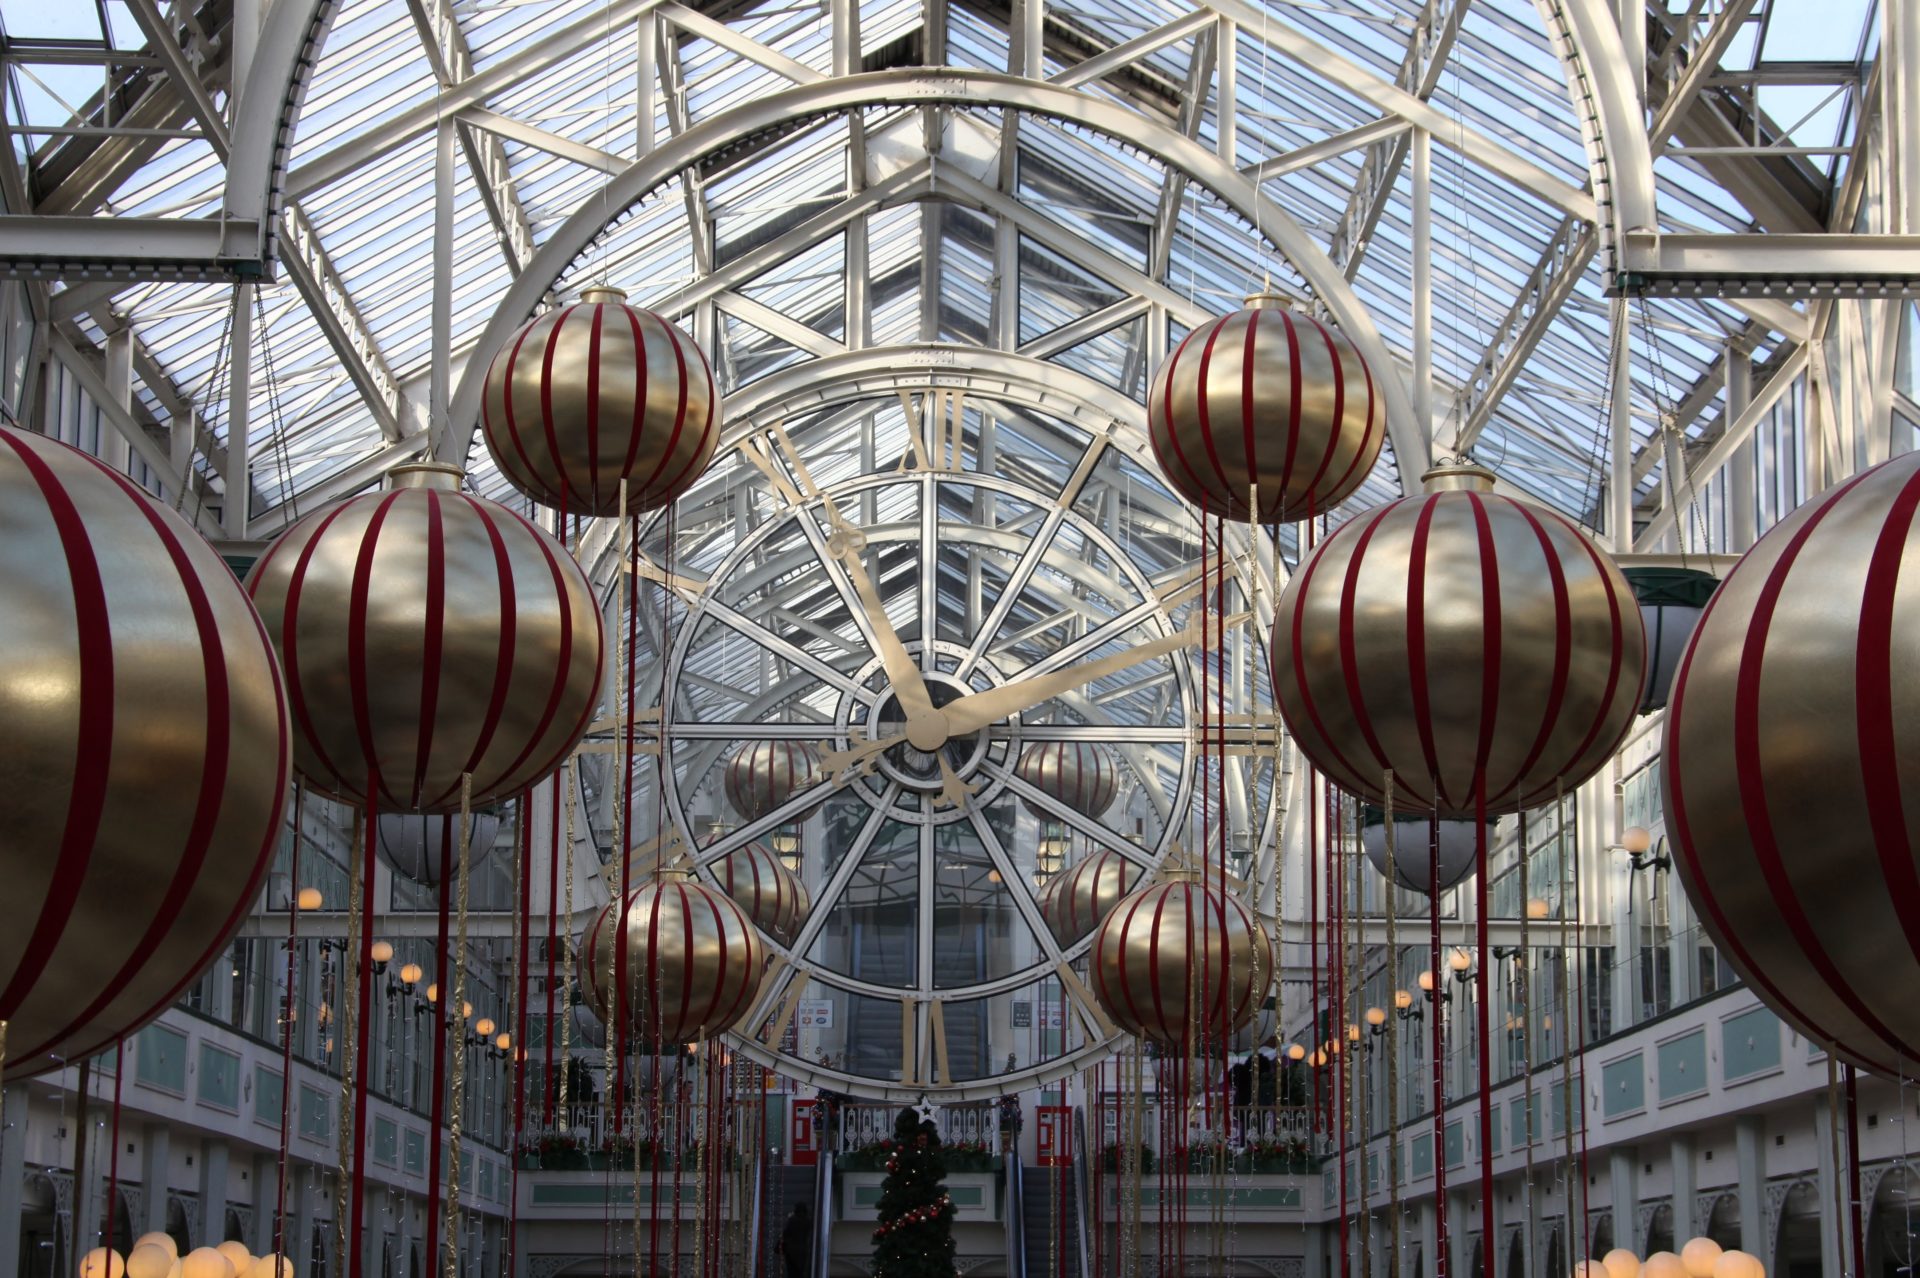 St Stephen's Green Shopping Centre in Dublin decorated for Christmas in November 2013.